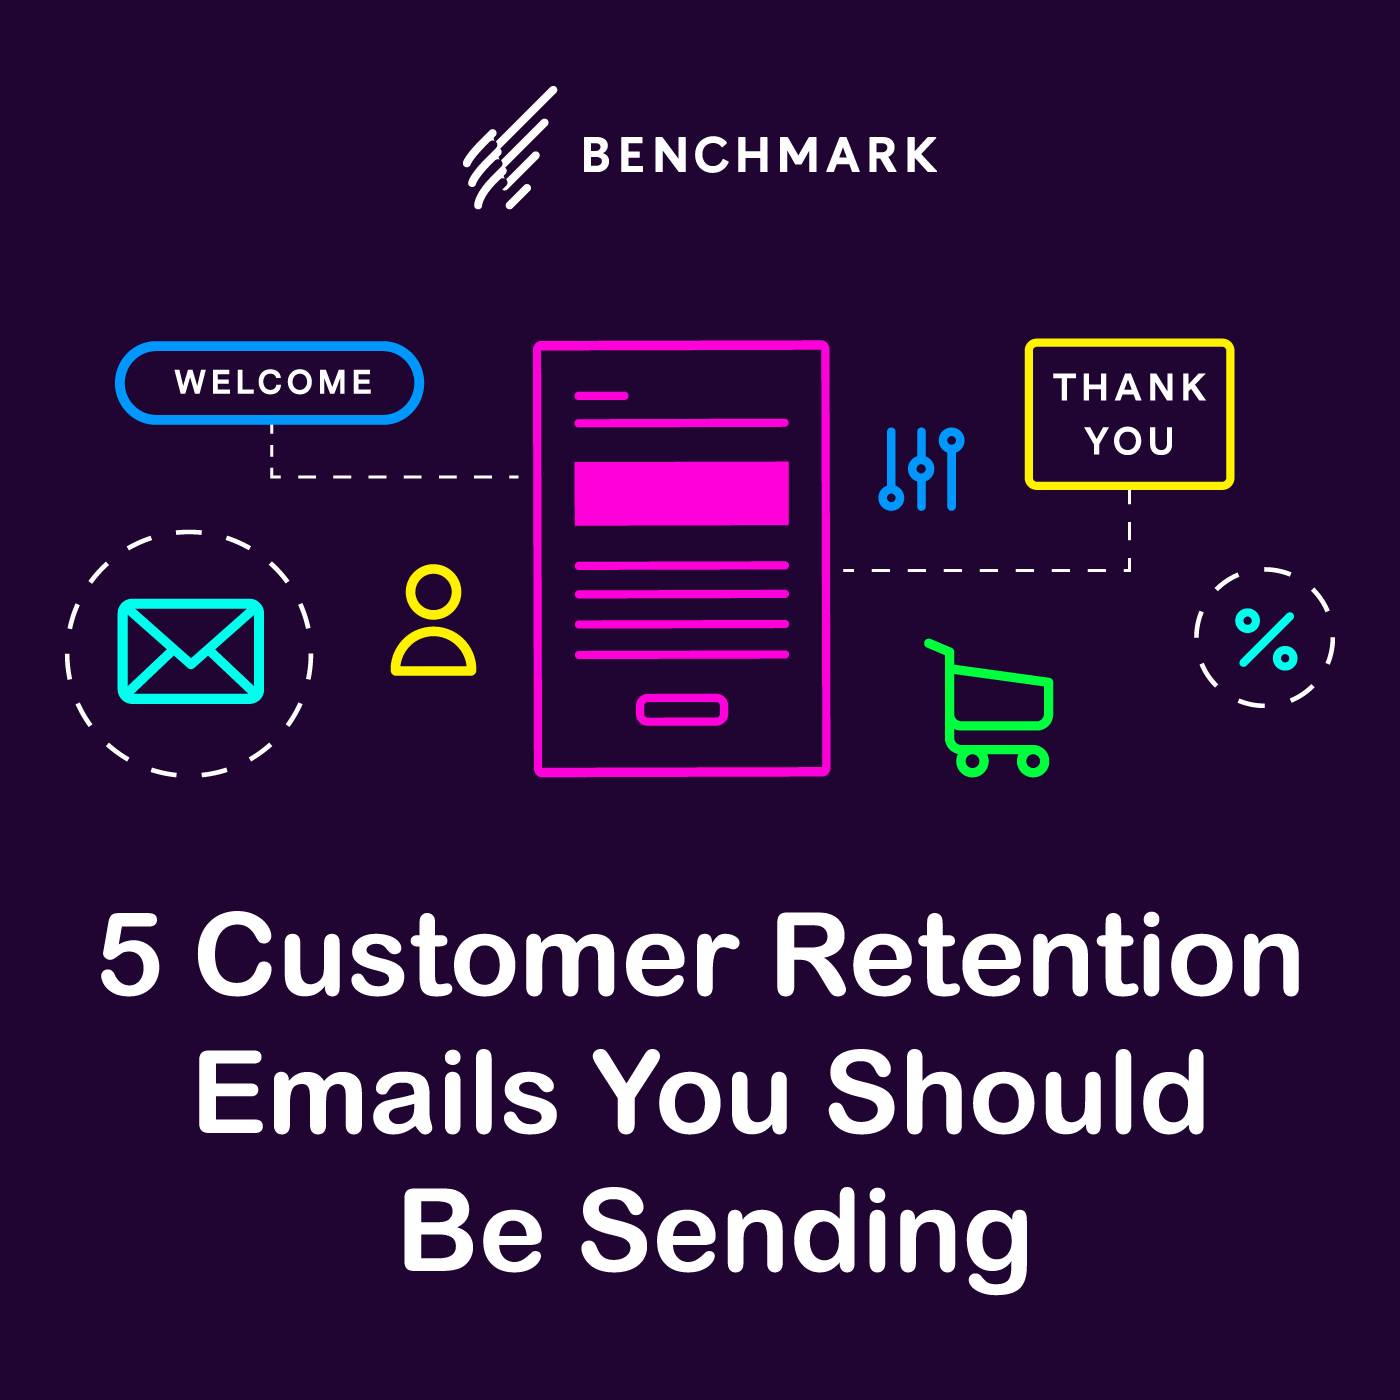 5 Customer Retention Emails You Should Be Sending